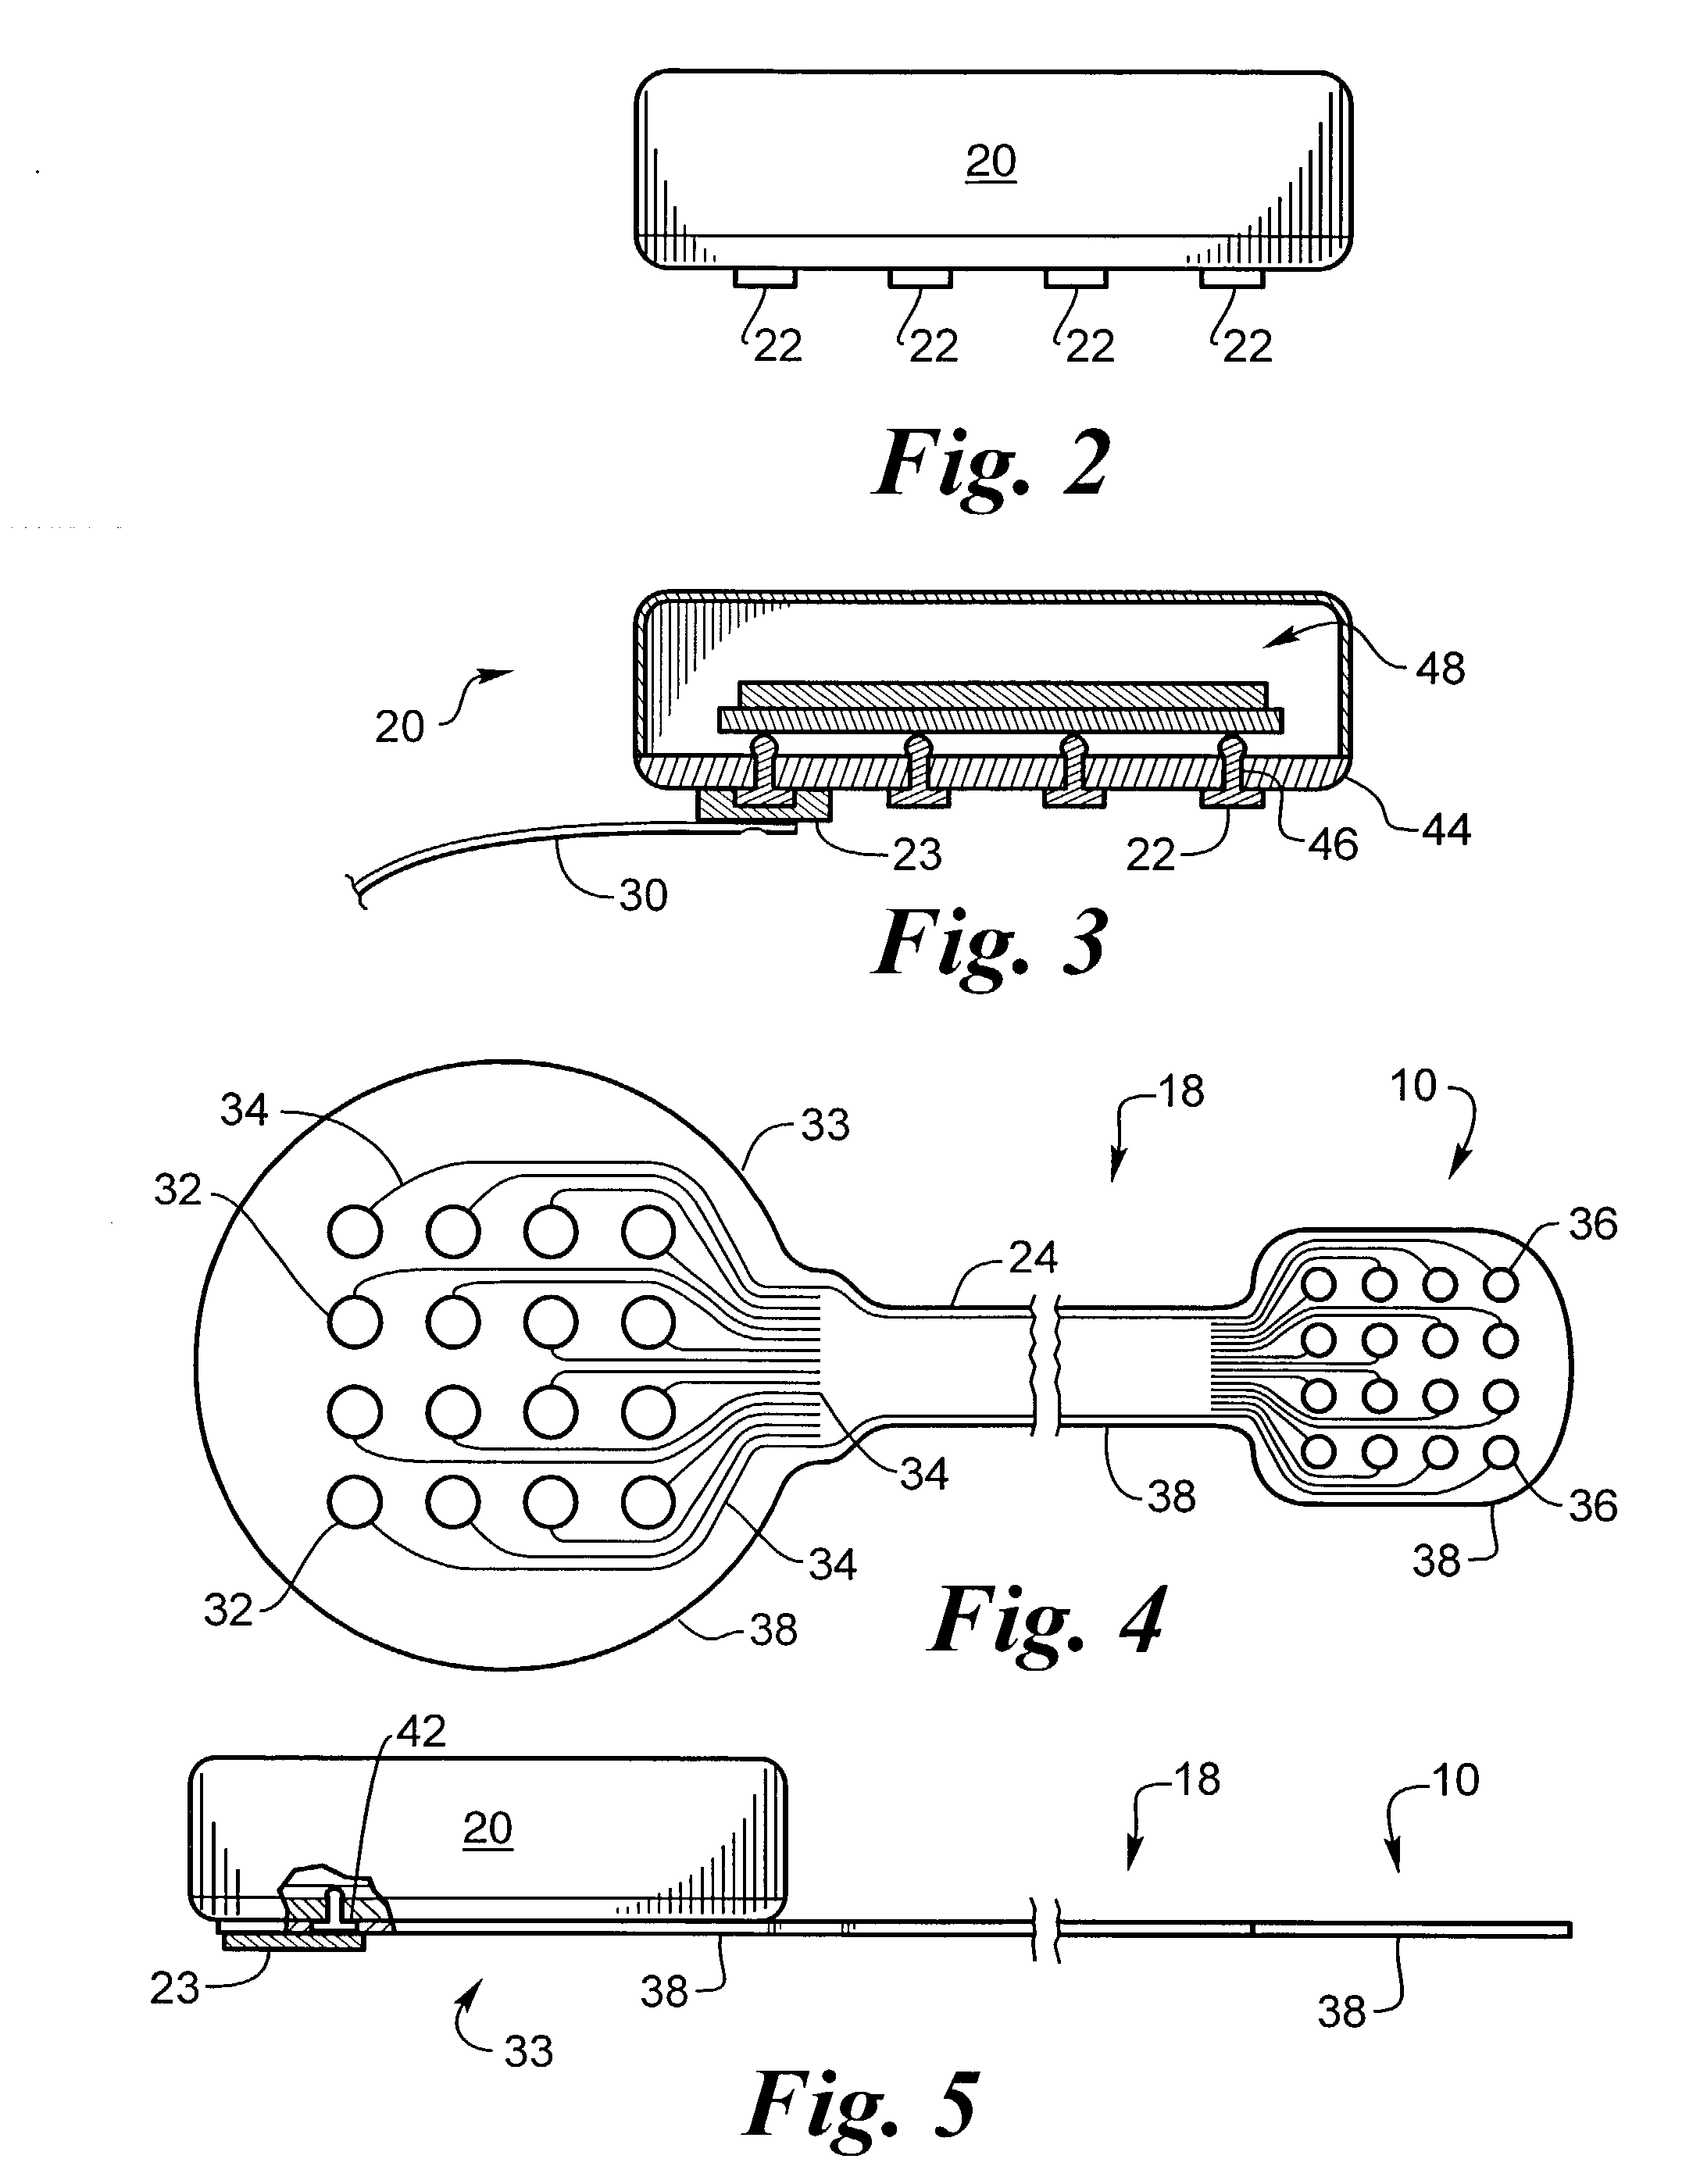 Biocompatible bonding method and electronics package suitable for implantation